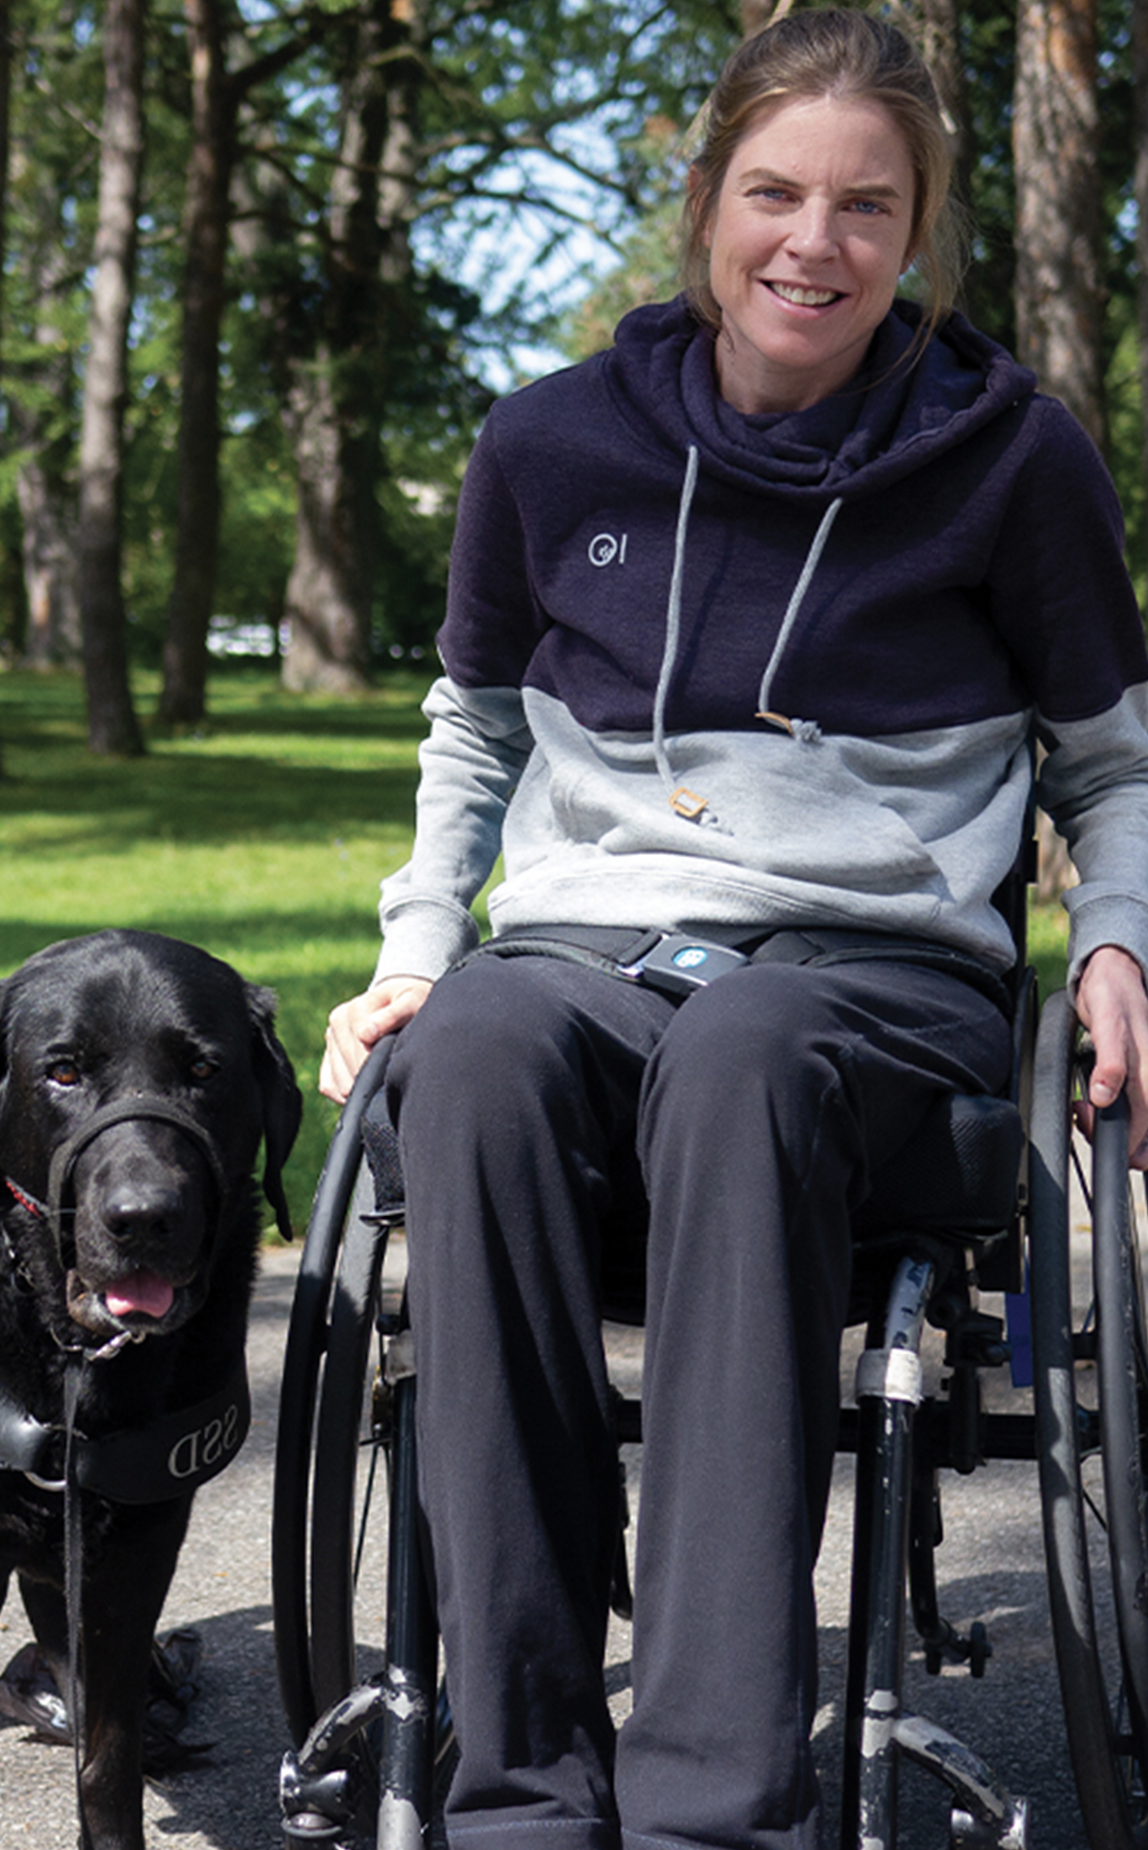 A young white female with blond hair sits in her wheelchair smiling beside her therapy dog.